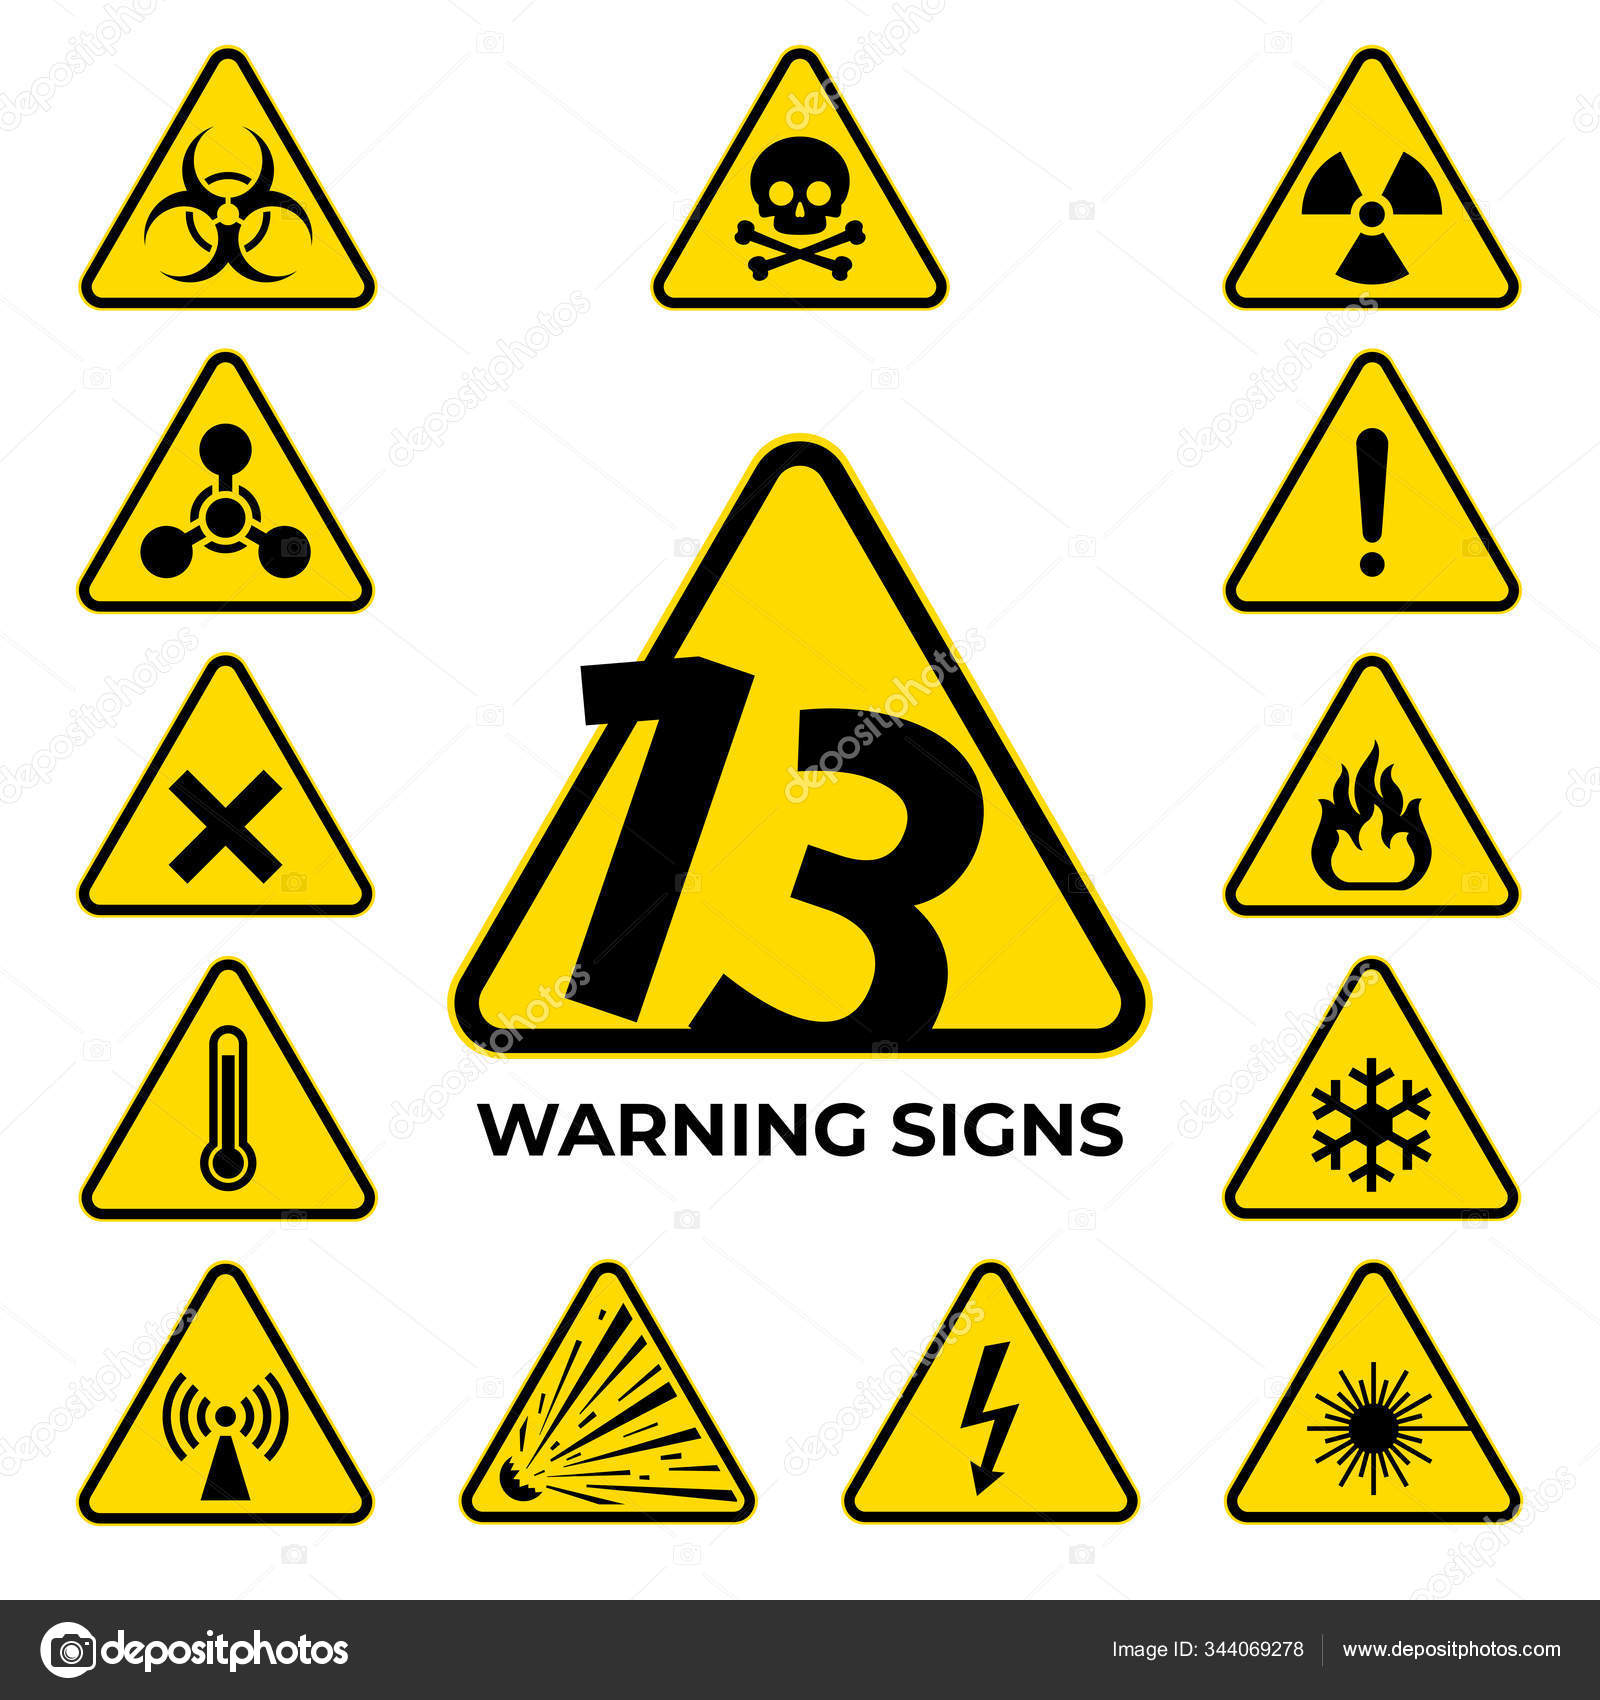 394 Lab Safety Symbols Vector Images Free Royalty Free Lab Safety Symbols Vectors Depositphotos